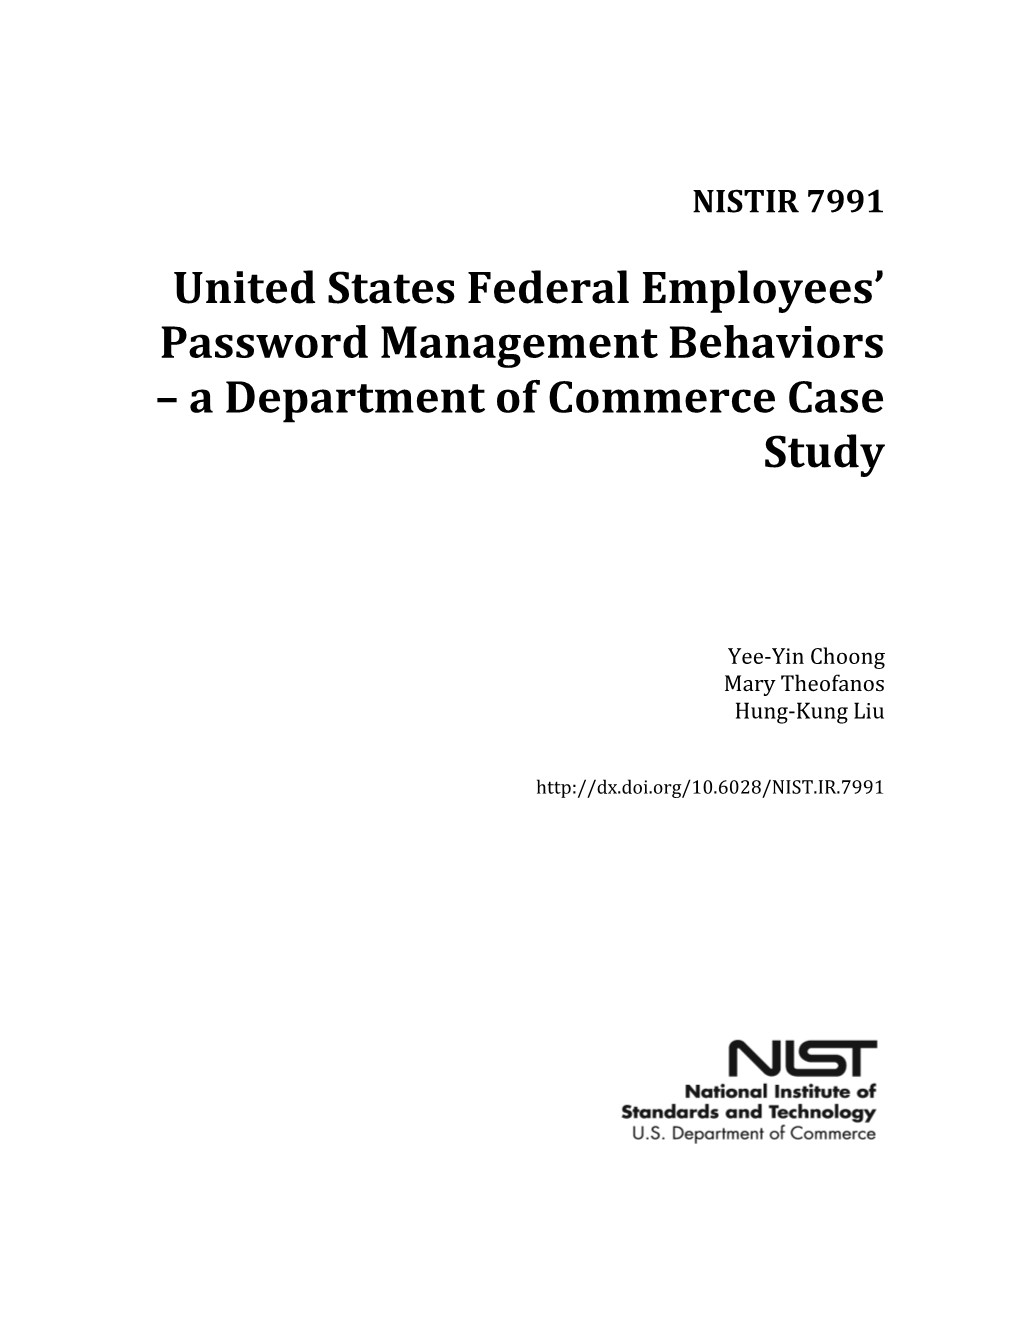 United States Federal Employees' Password Management Behaviors